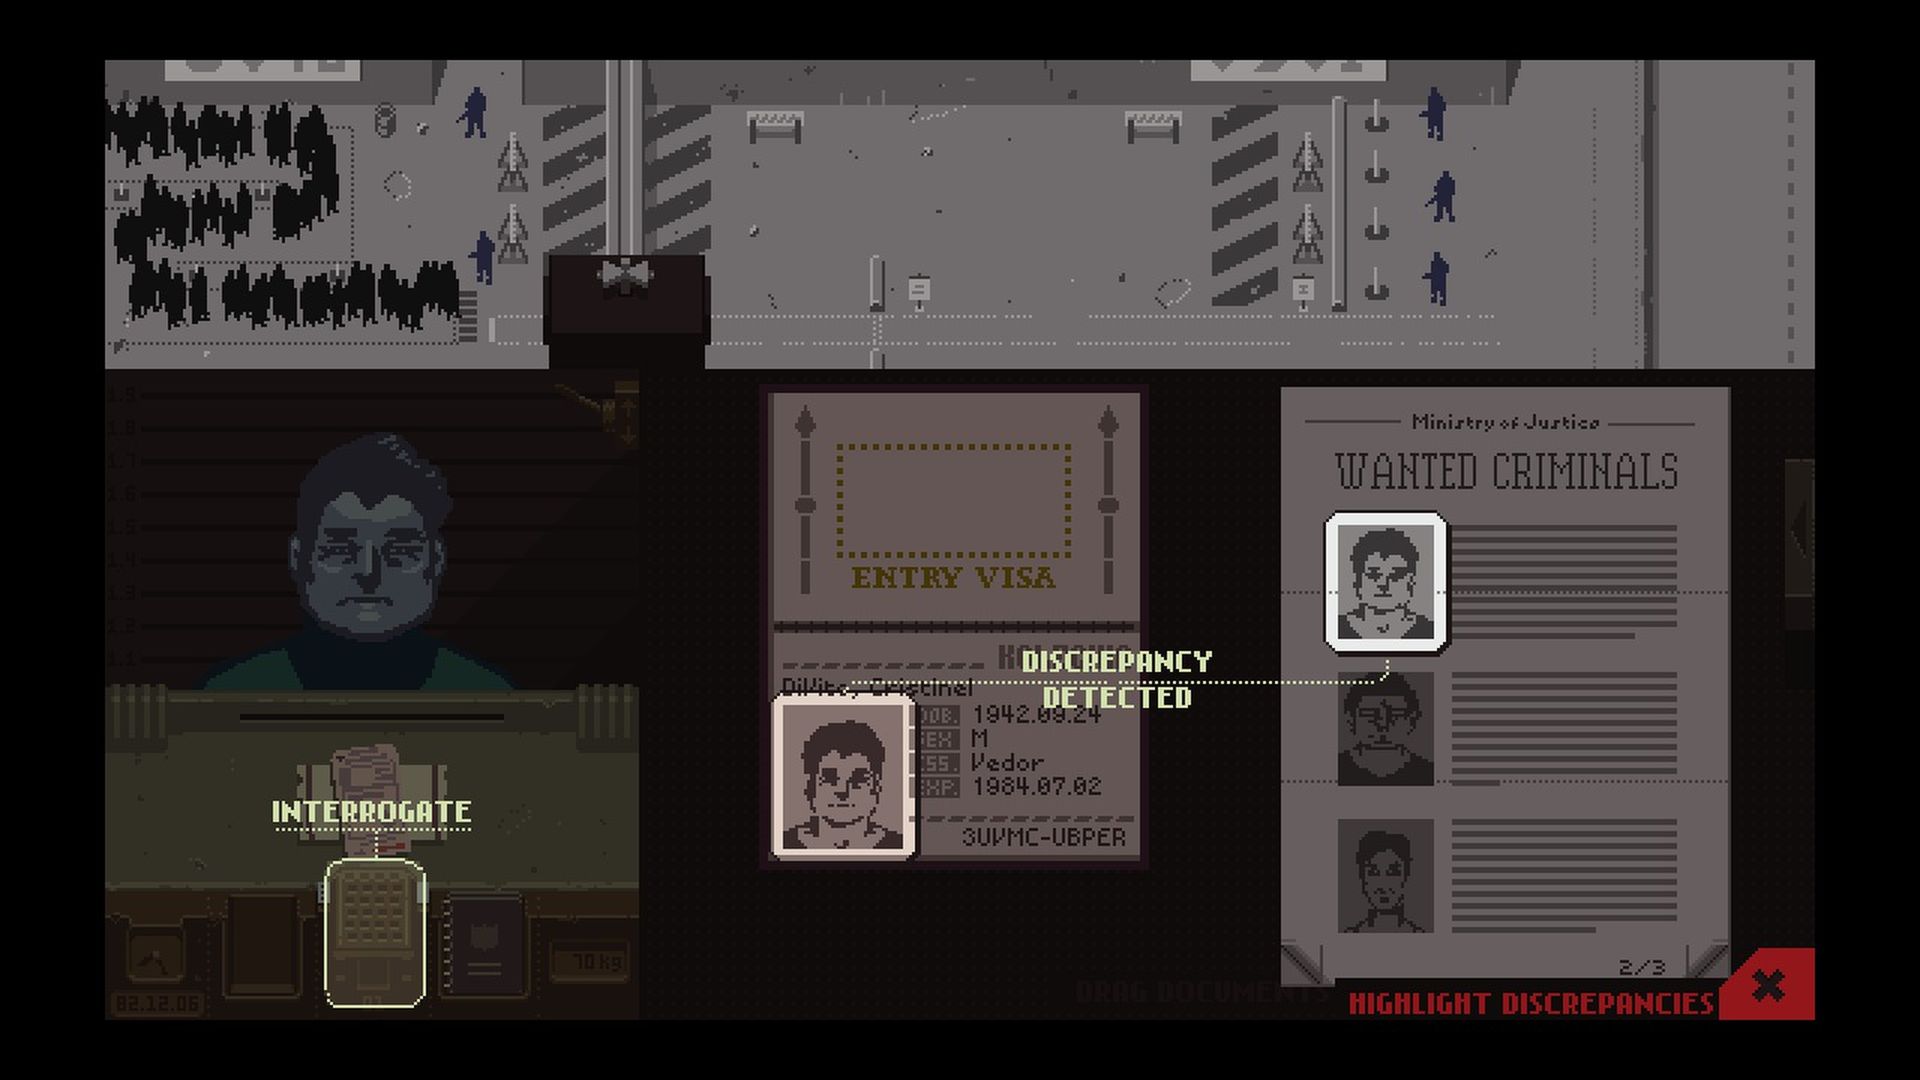 Screenshot of a video game showing documents that a border guard is checking, noting a discrepancy in images